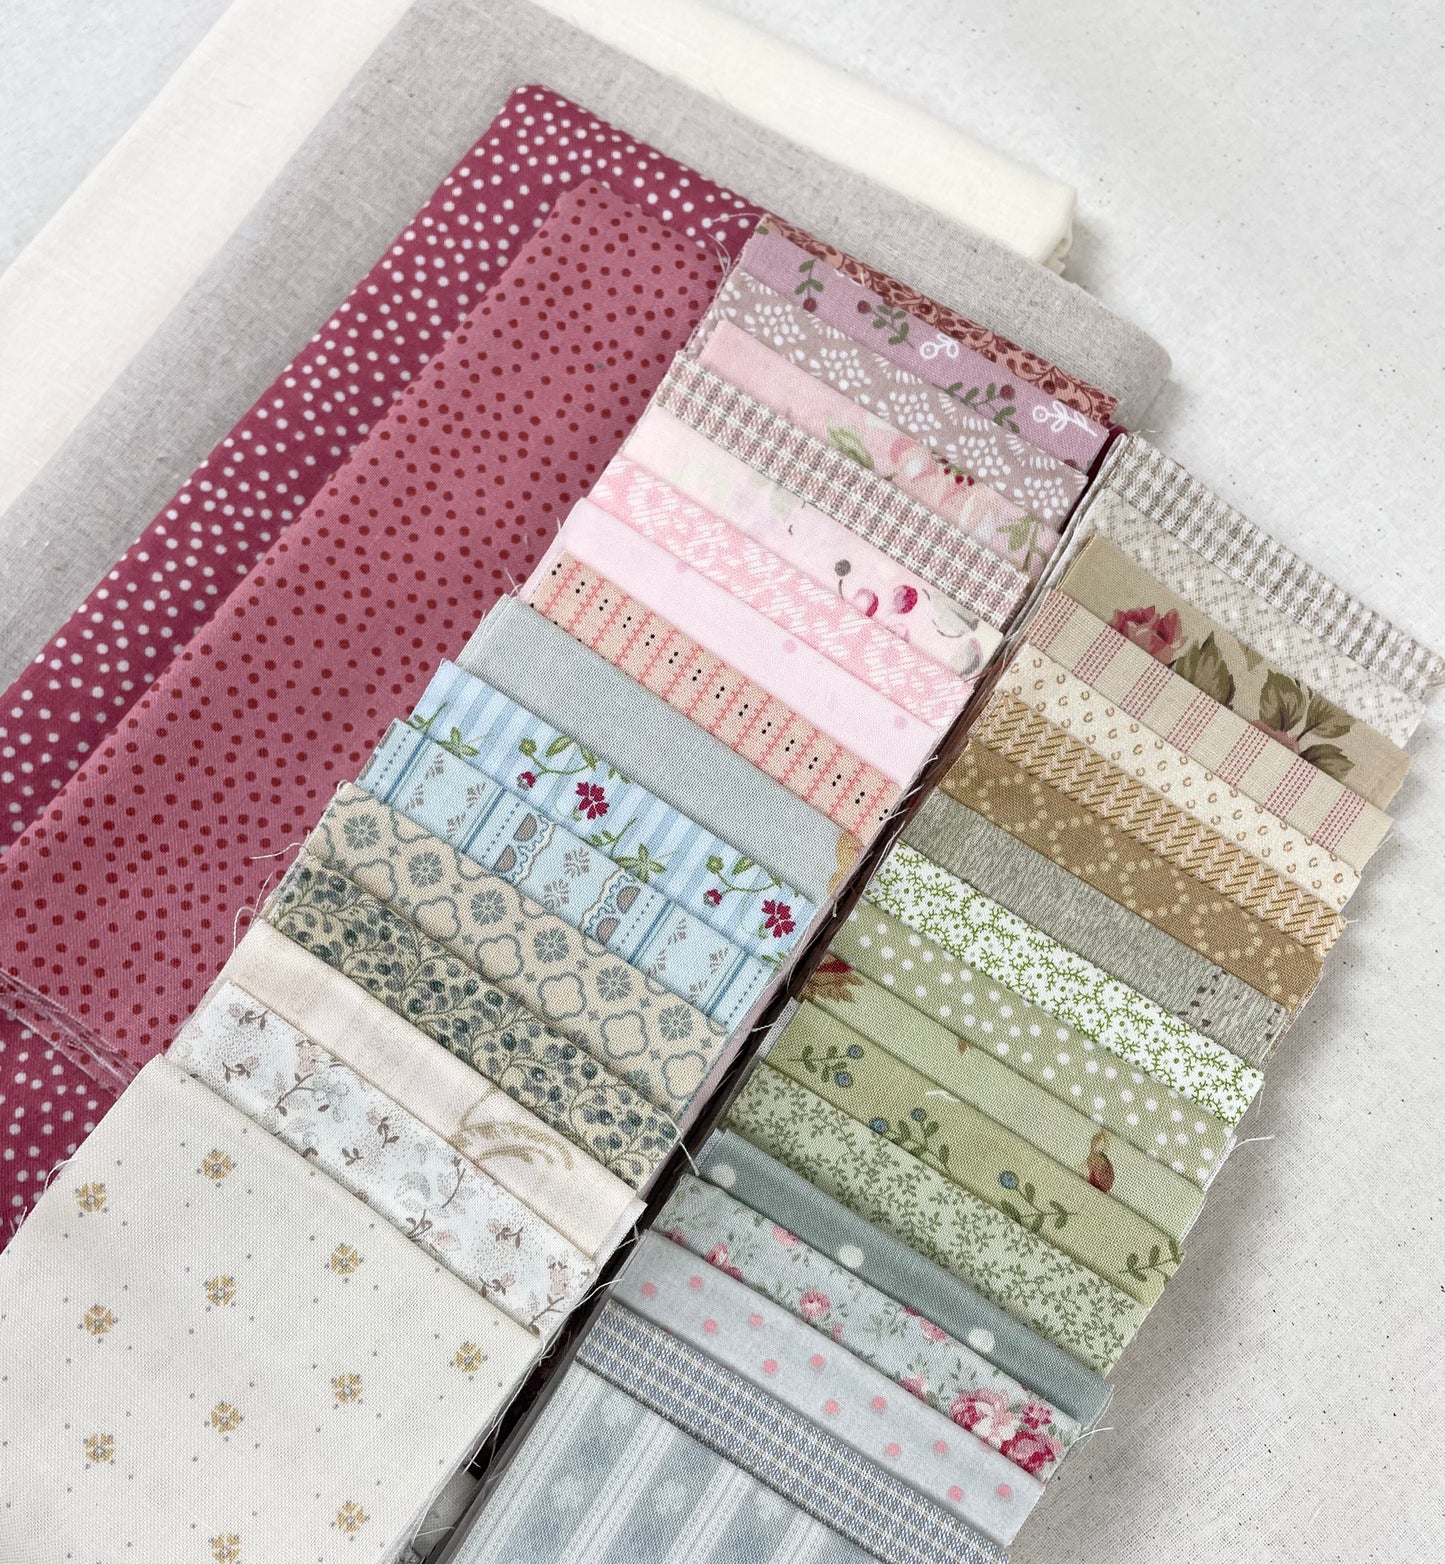 Sew with Love Teddy Quilt fabric kit